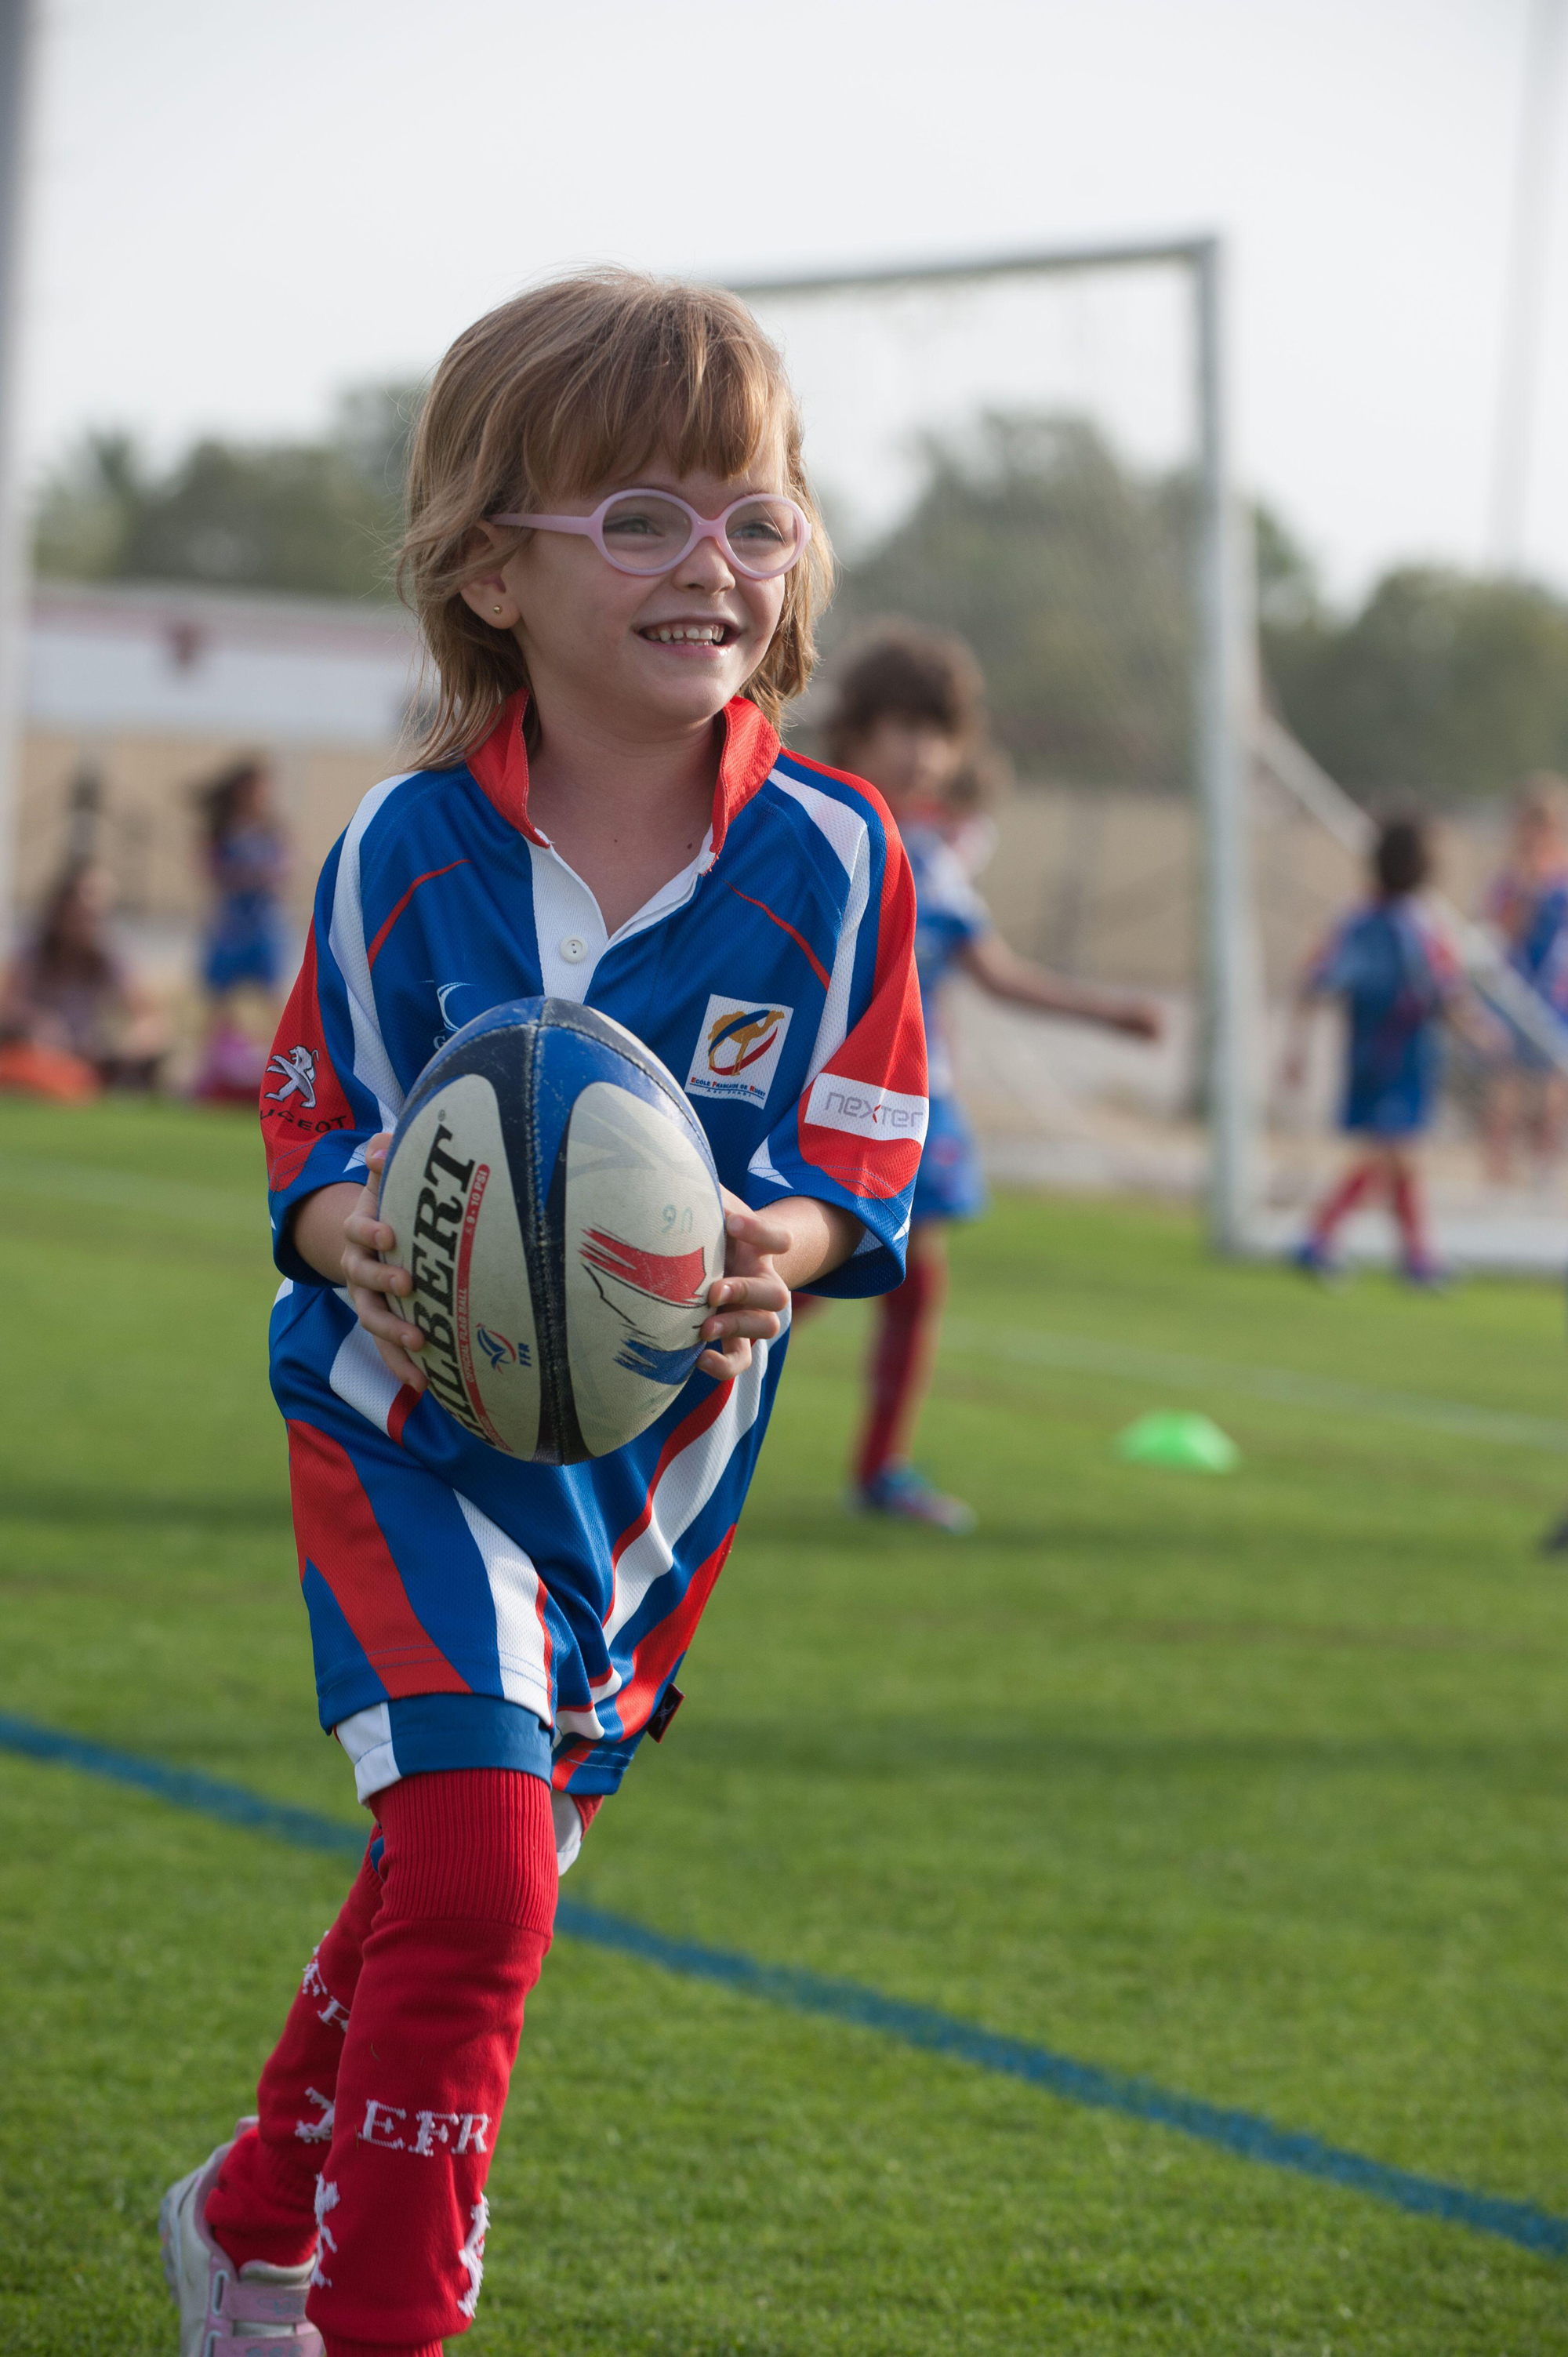 Child playing rugby